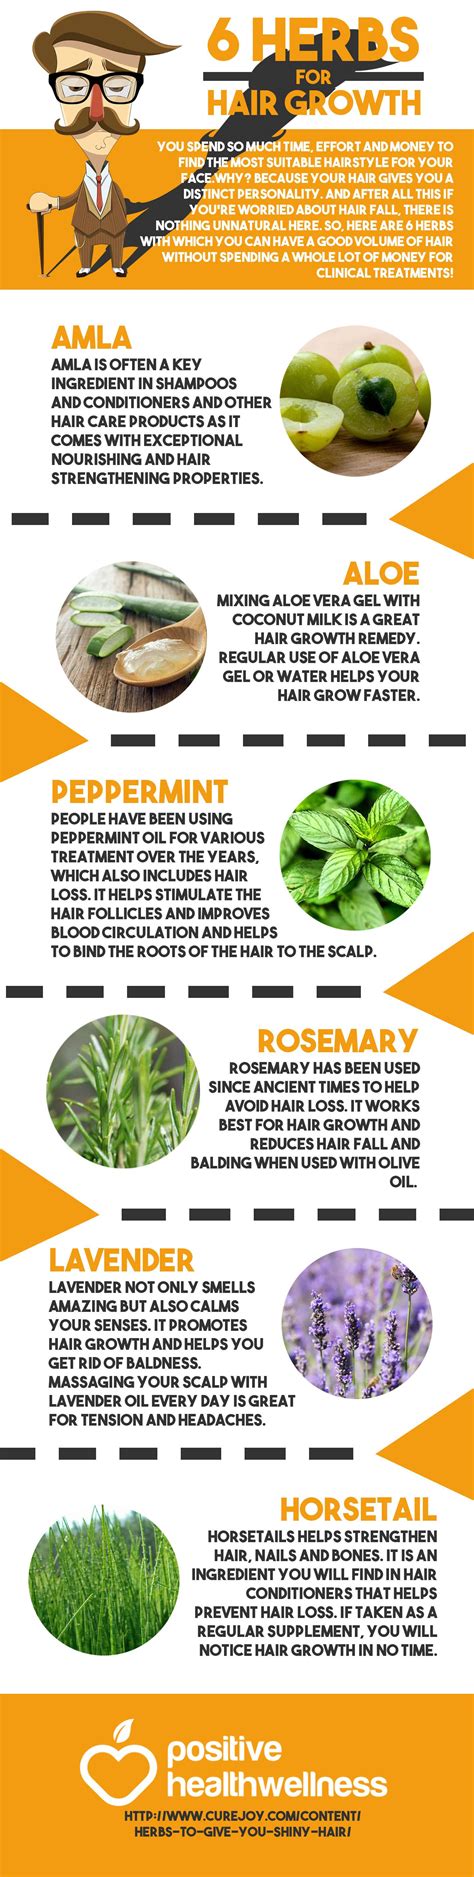 6 Herbs For Hair Growth Infographic